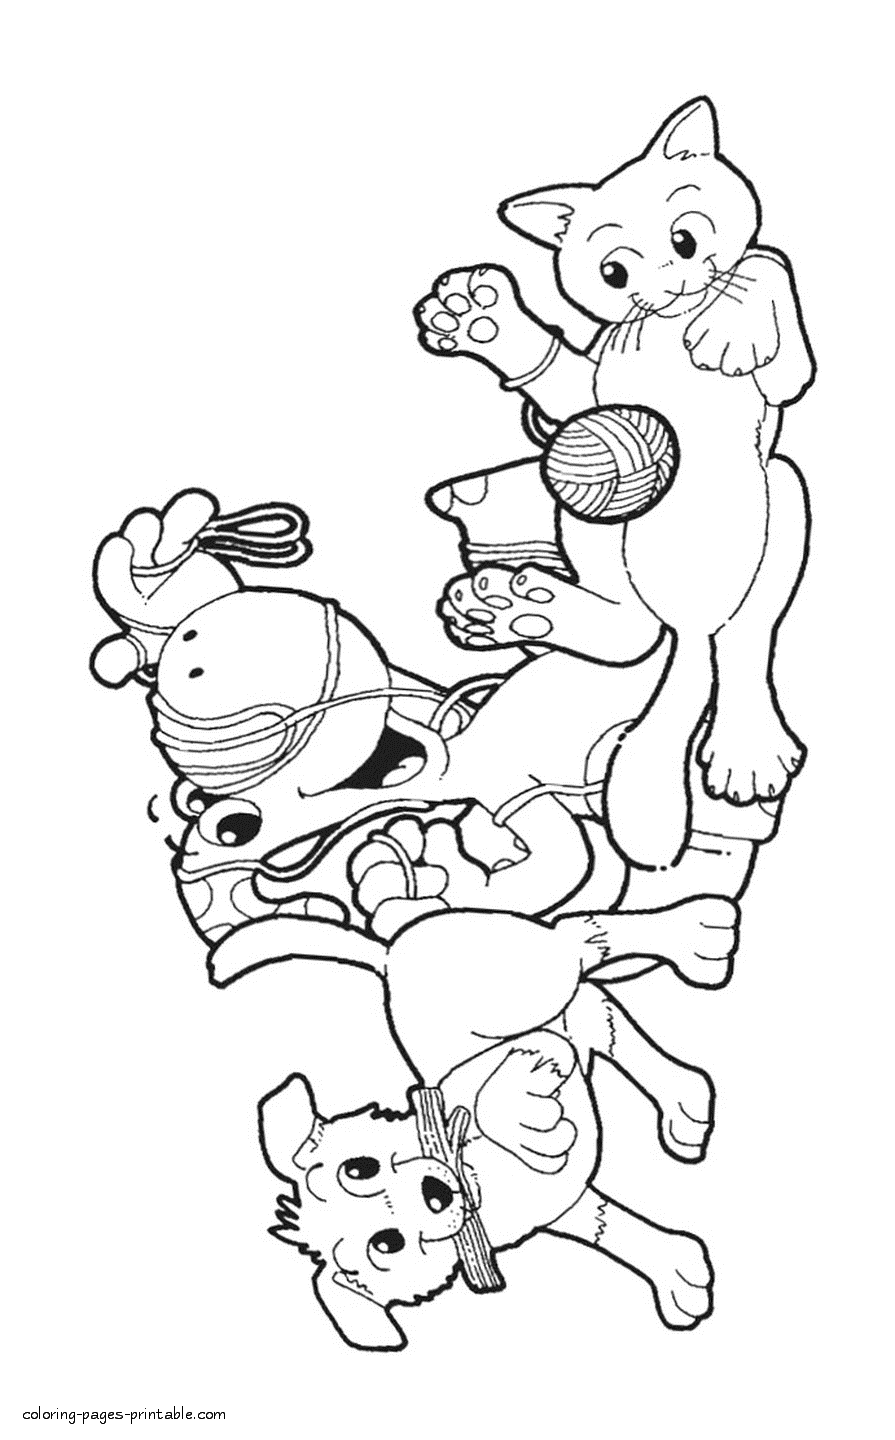 Coloring pages dogs and cats are playing